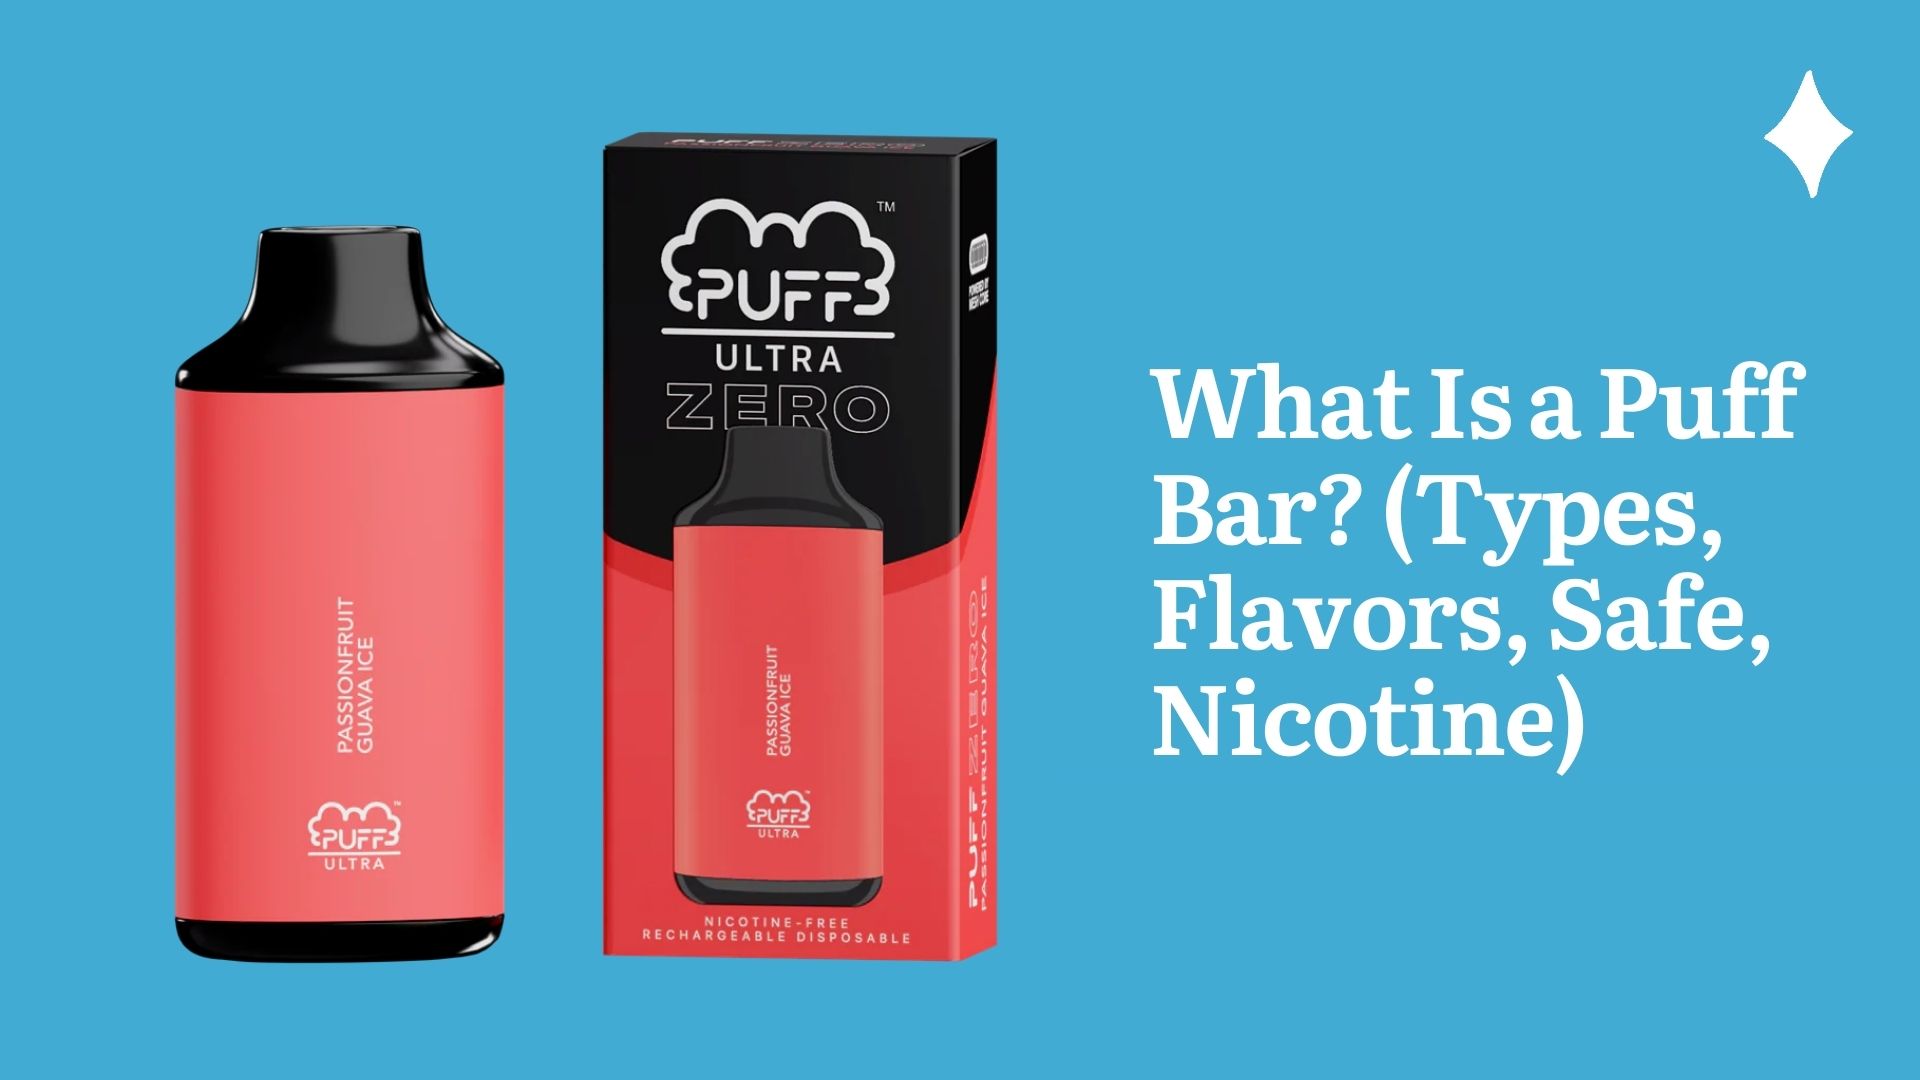 What Is a Puff Bar? (Types, Flavors, Safe, Nicotine)